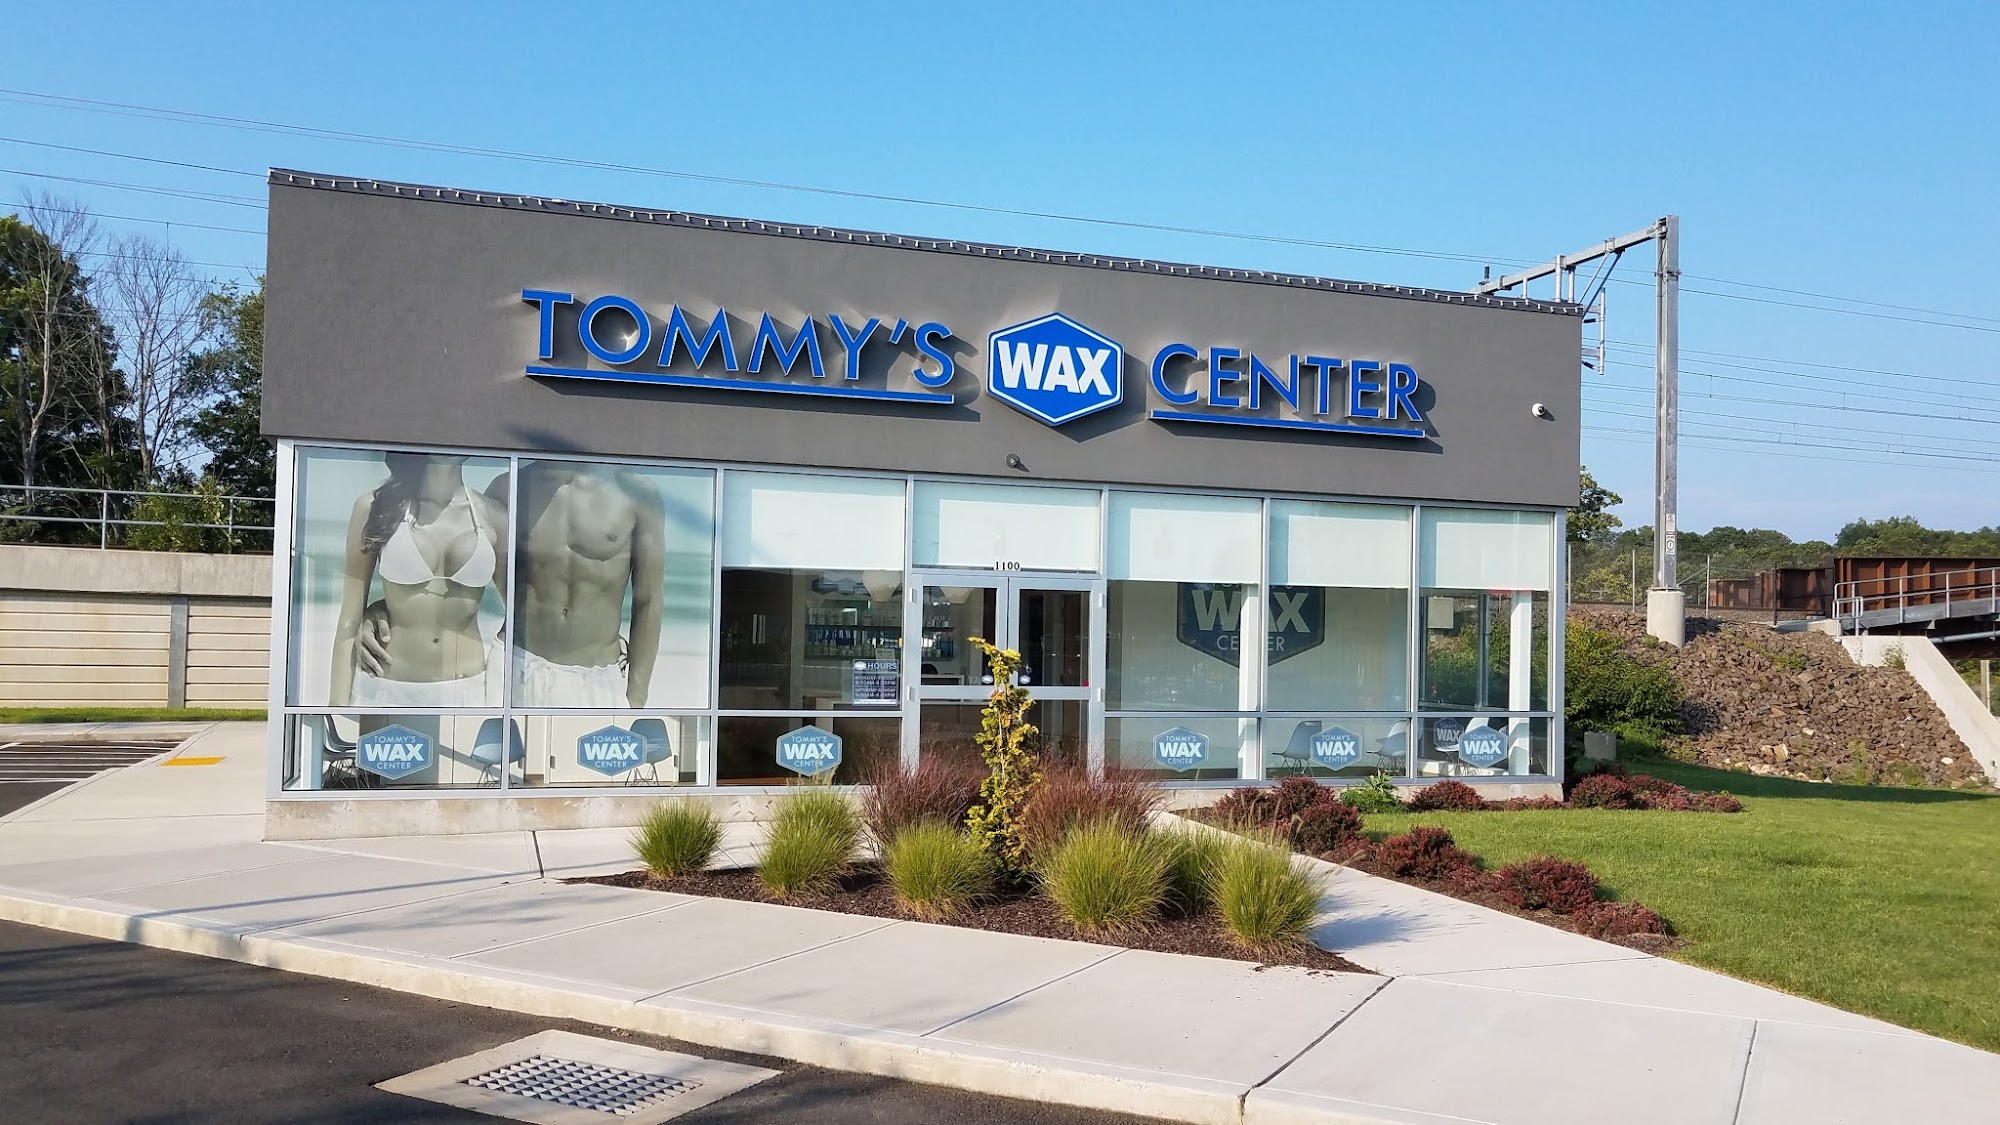 Tommy's Wax Center